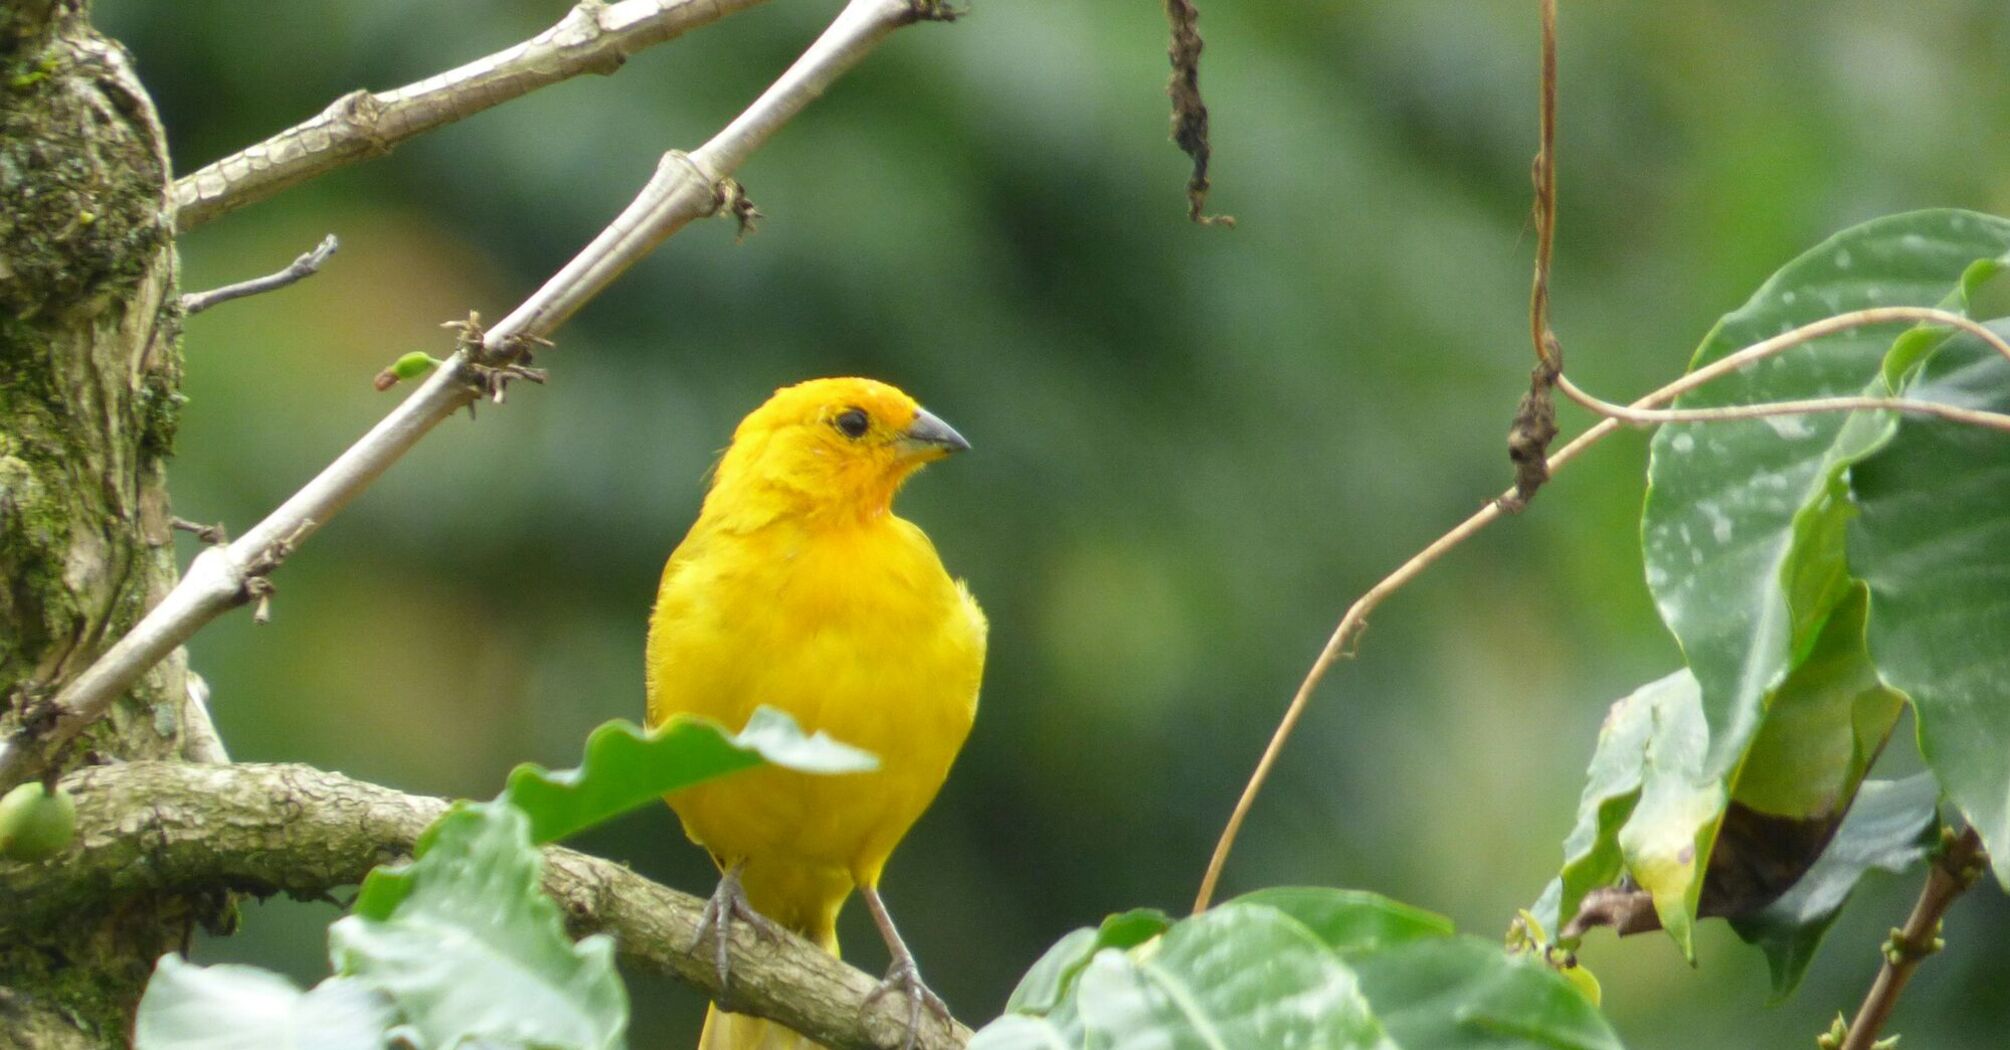 A bright yellow bird perched on a branch with green leaves in the background